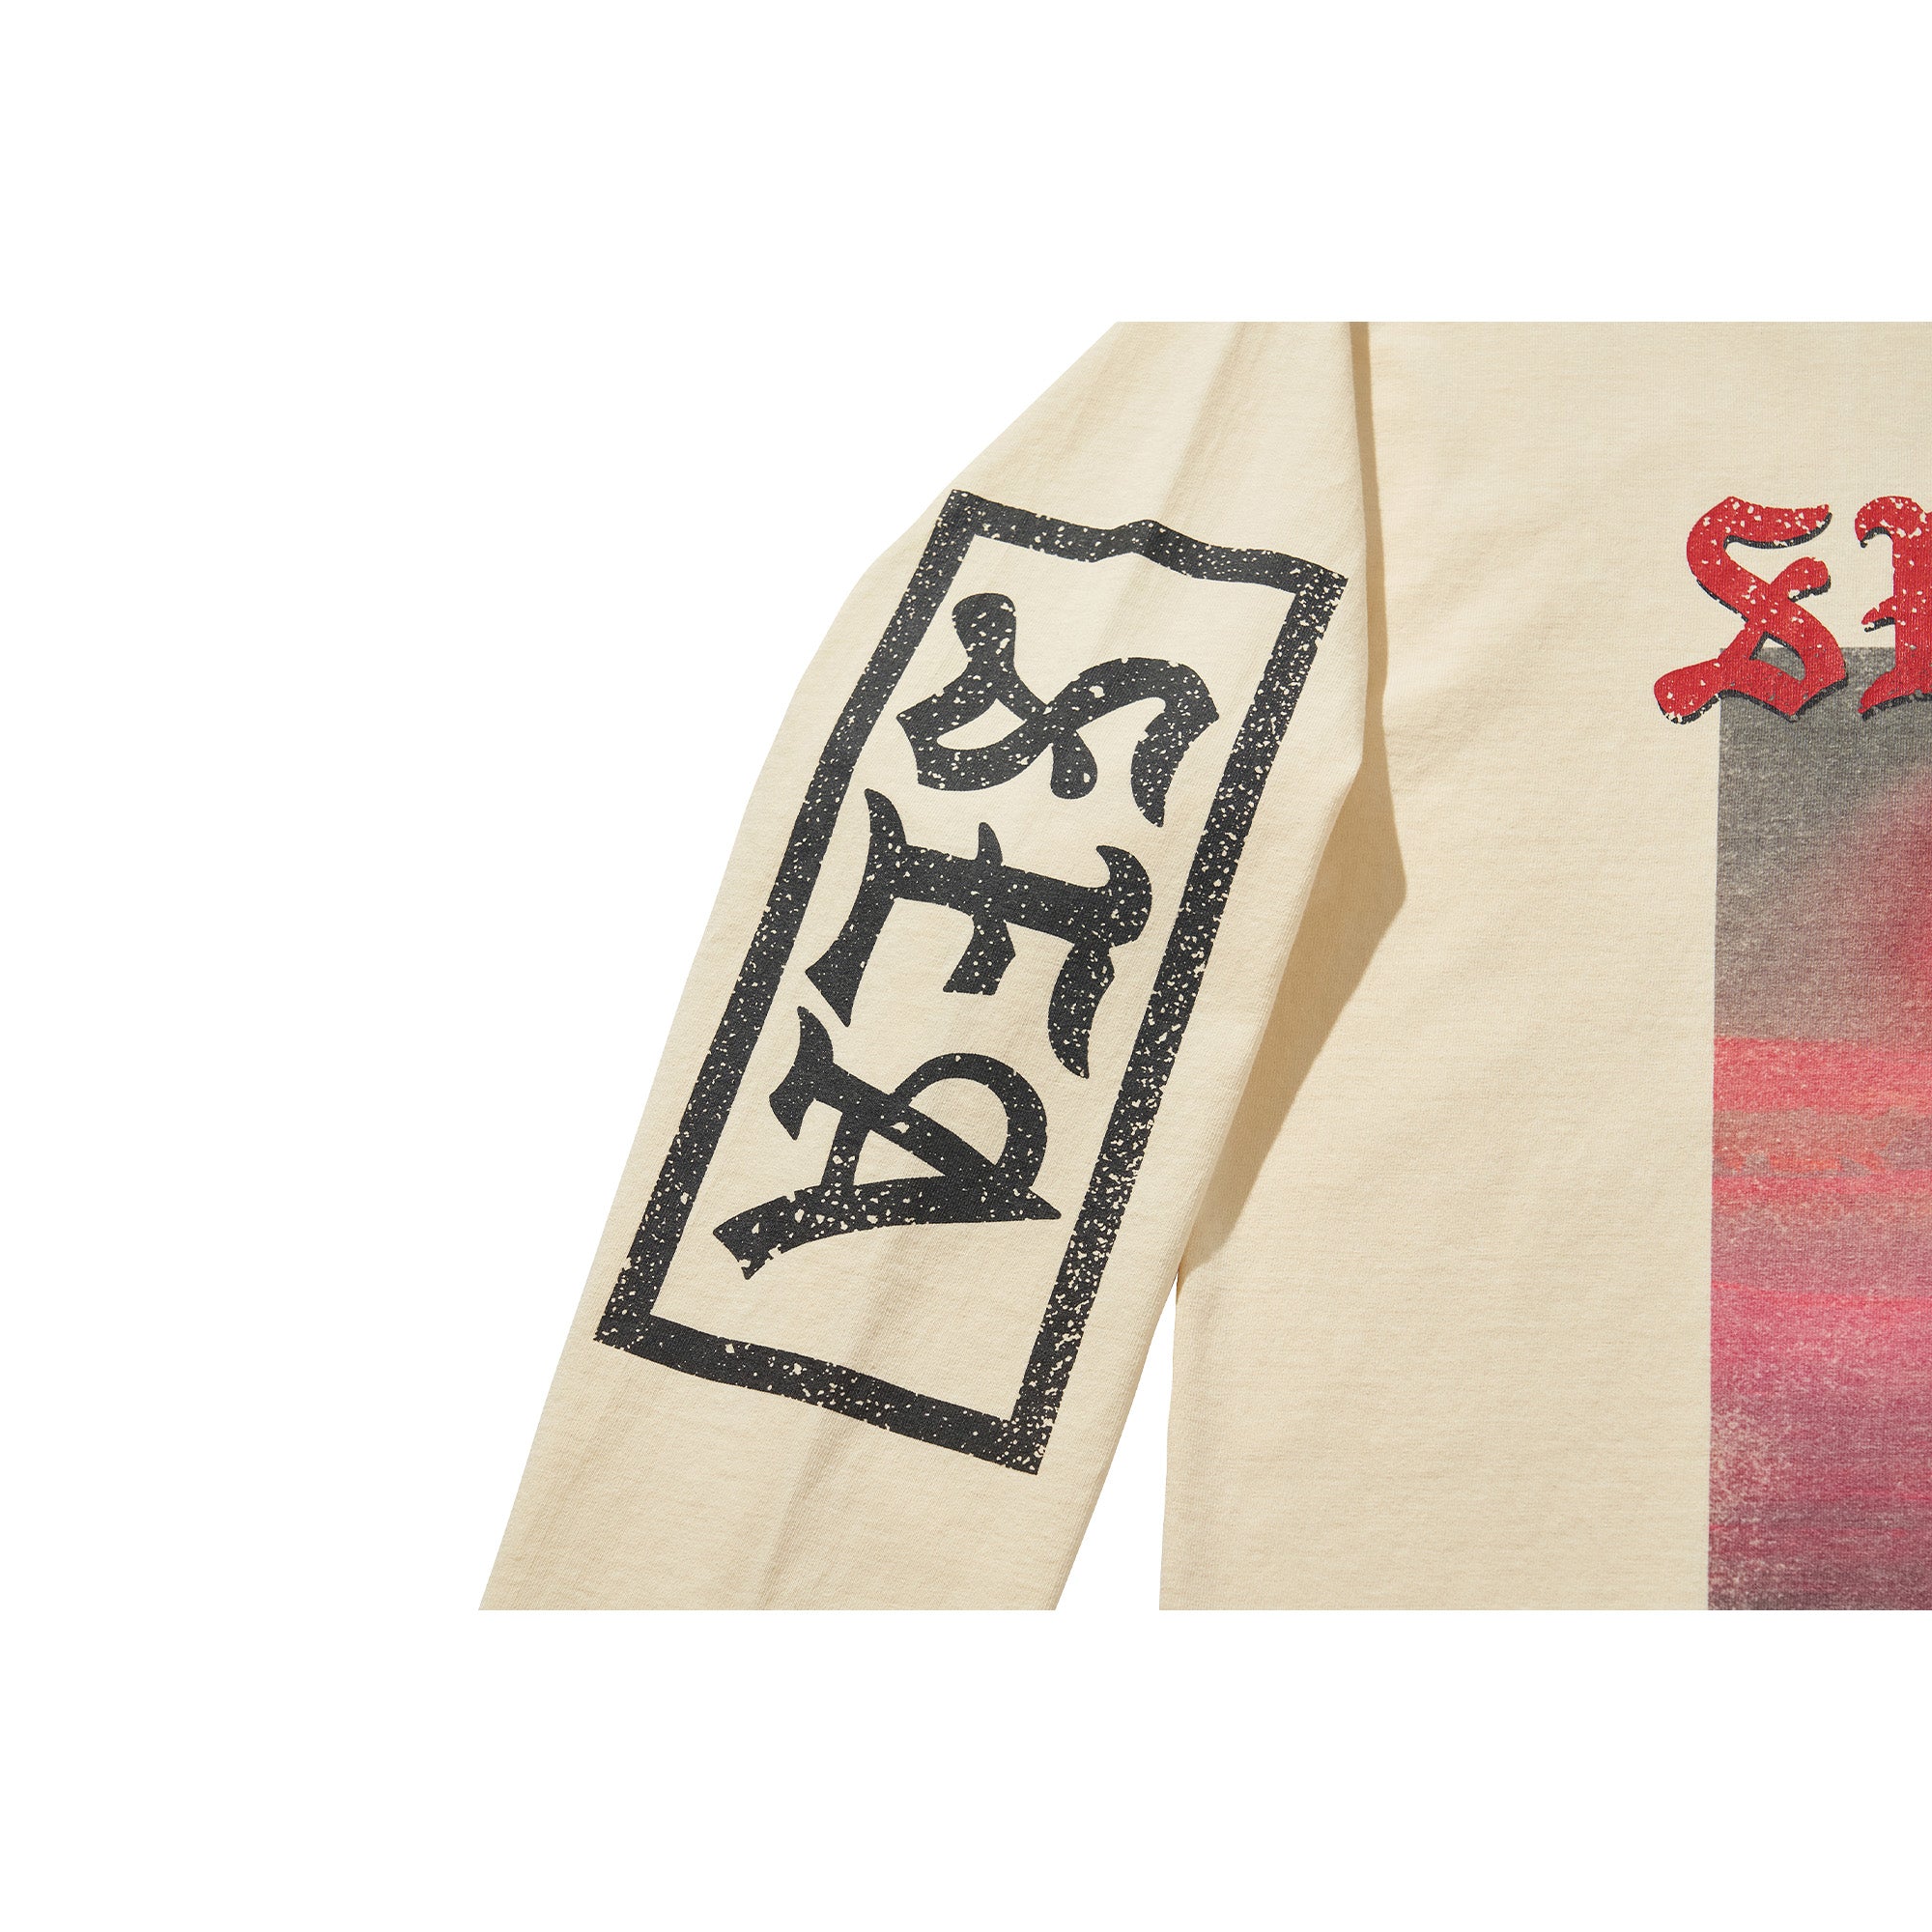 WDS X LIBERE GRAPHIC LS TEE / IVORY